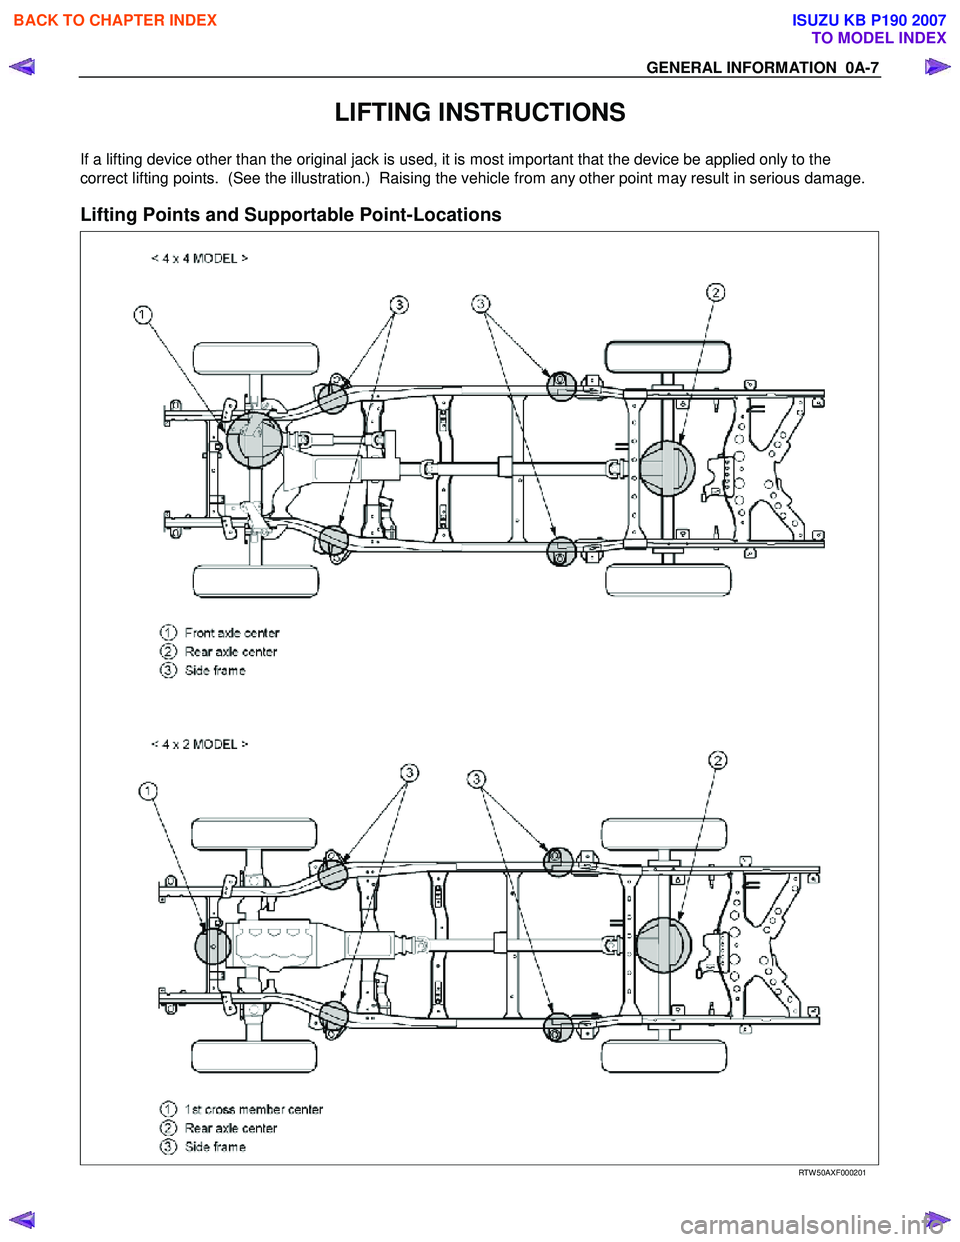 ISUZU KB P190 2007  Workshop Repair Manual GENERAL INFORMATION  0A-7 
LIFTING INSTRUCTIONS 
If a lifting device other than the original jack is used, it is most important that the device be applied only to the  
correct lifting points.  (See t